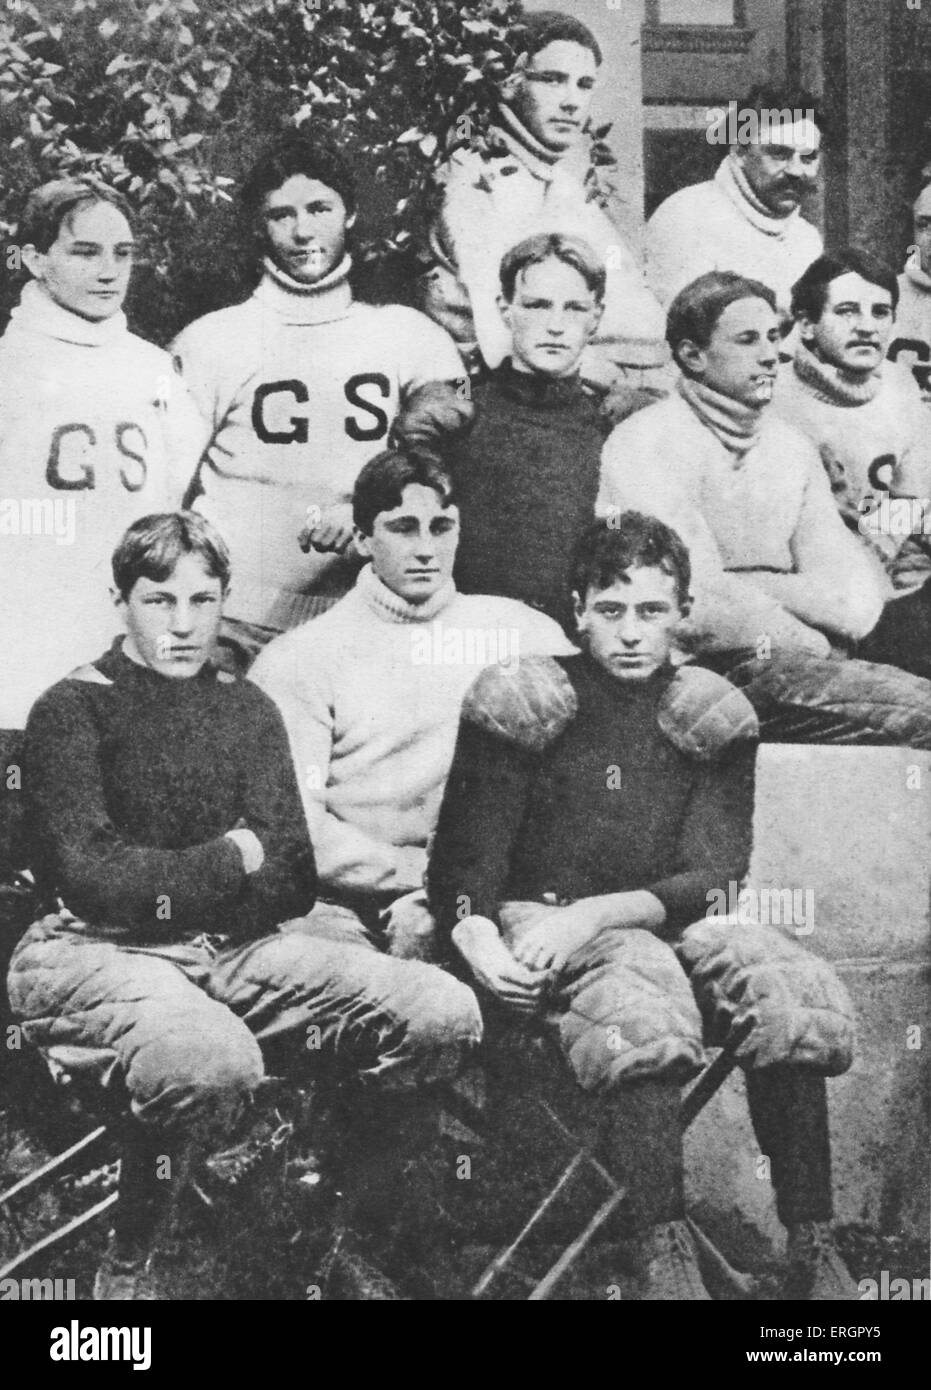 Franklin D. Roosevelt (front row, centre) as a teenager with his school football team at Groton School. FDR: 32nd President of Stock Photo